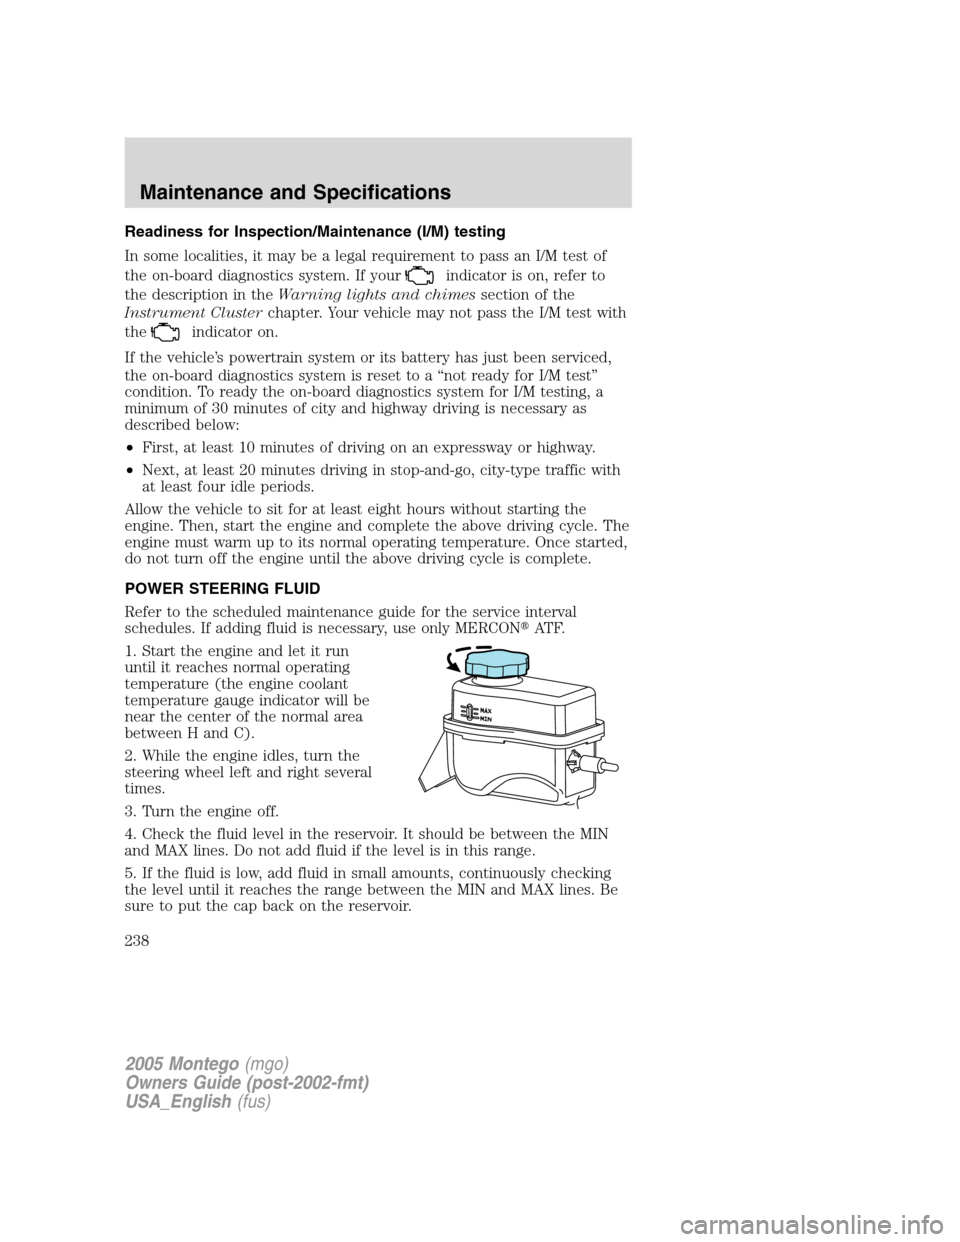 Mercury Montego 2005  s User Guide Readiness for Inspection/Maintenance (I/M) testing
In some localities, it may be a legal requirement to pass an I/M test of
the on-board diagnostics system. If your
indicator is on, refer to
the descr